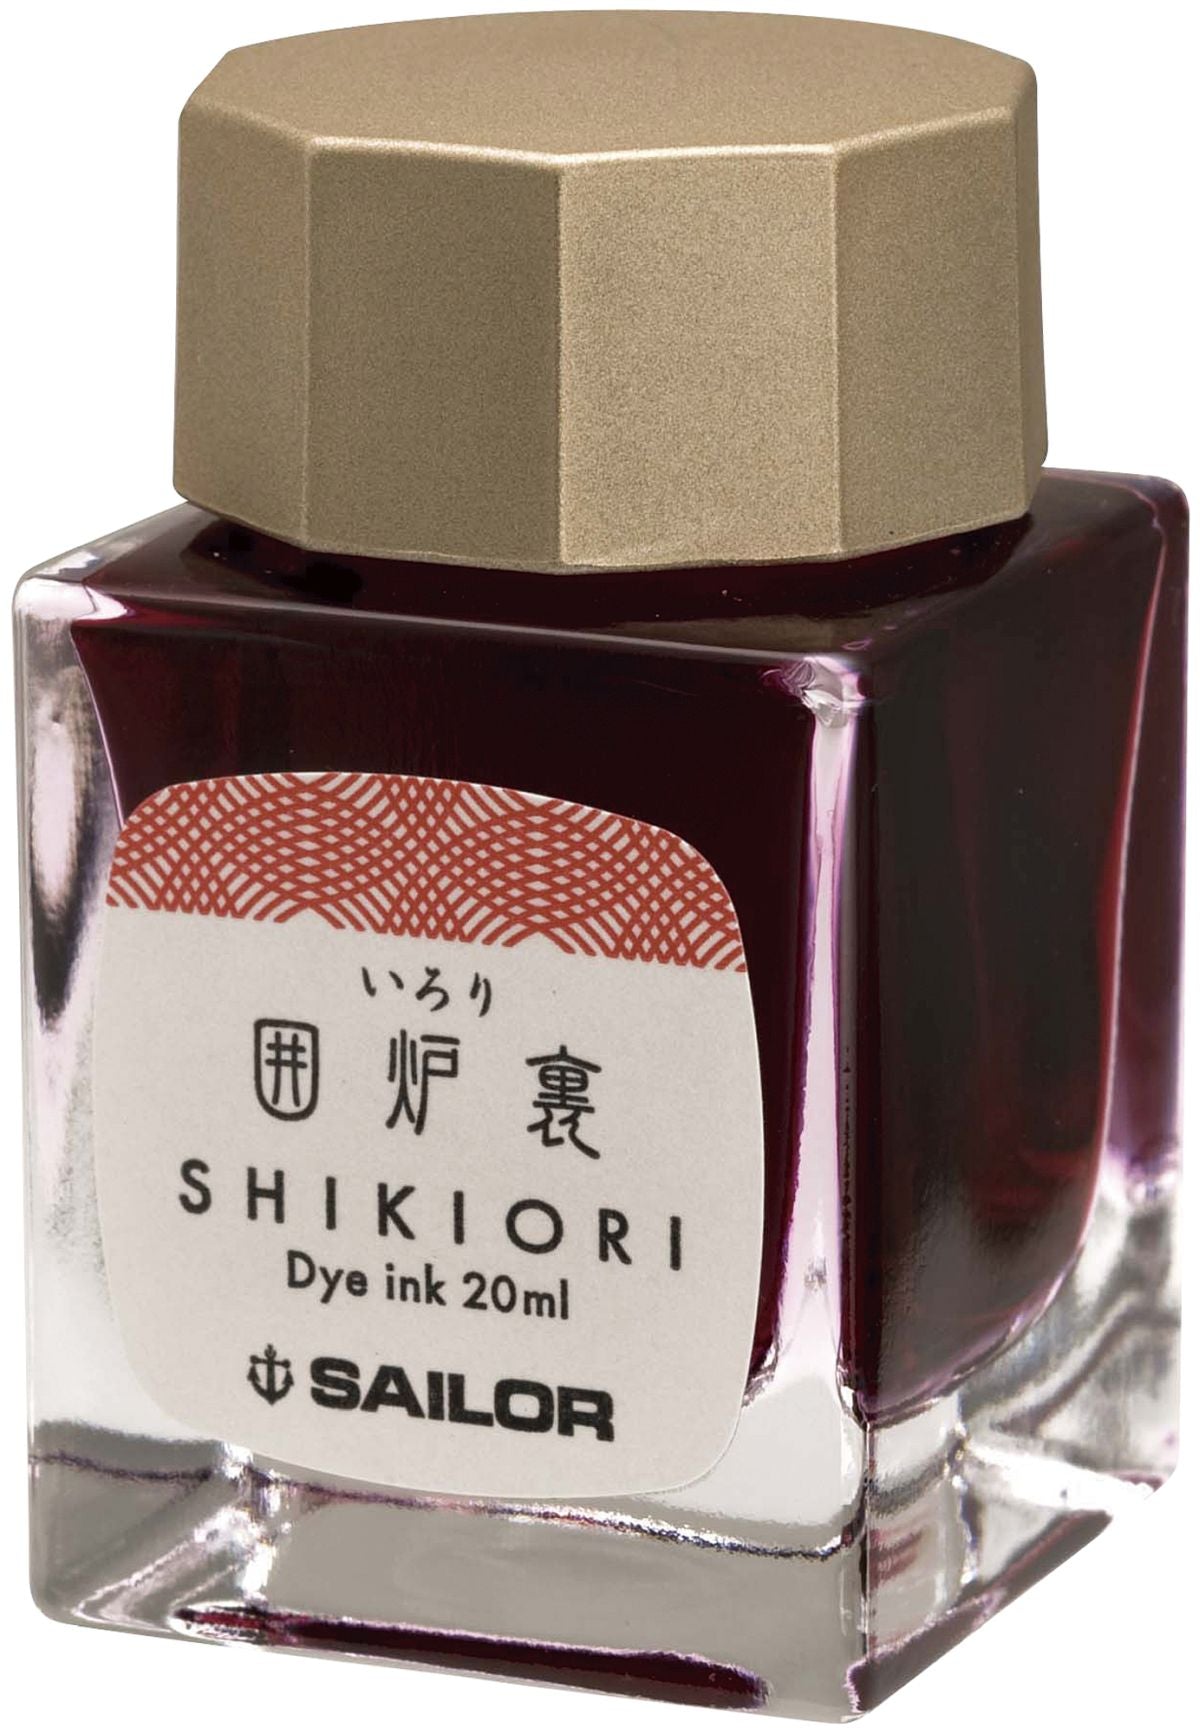 Sailor jentle ink - new packaging Irori (red)